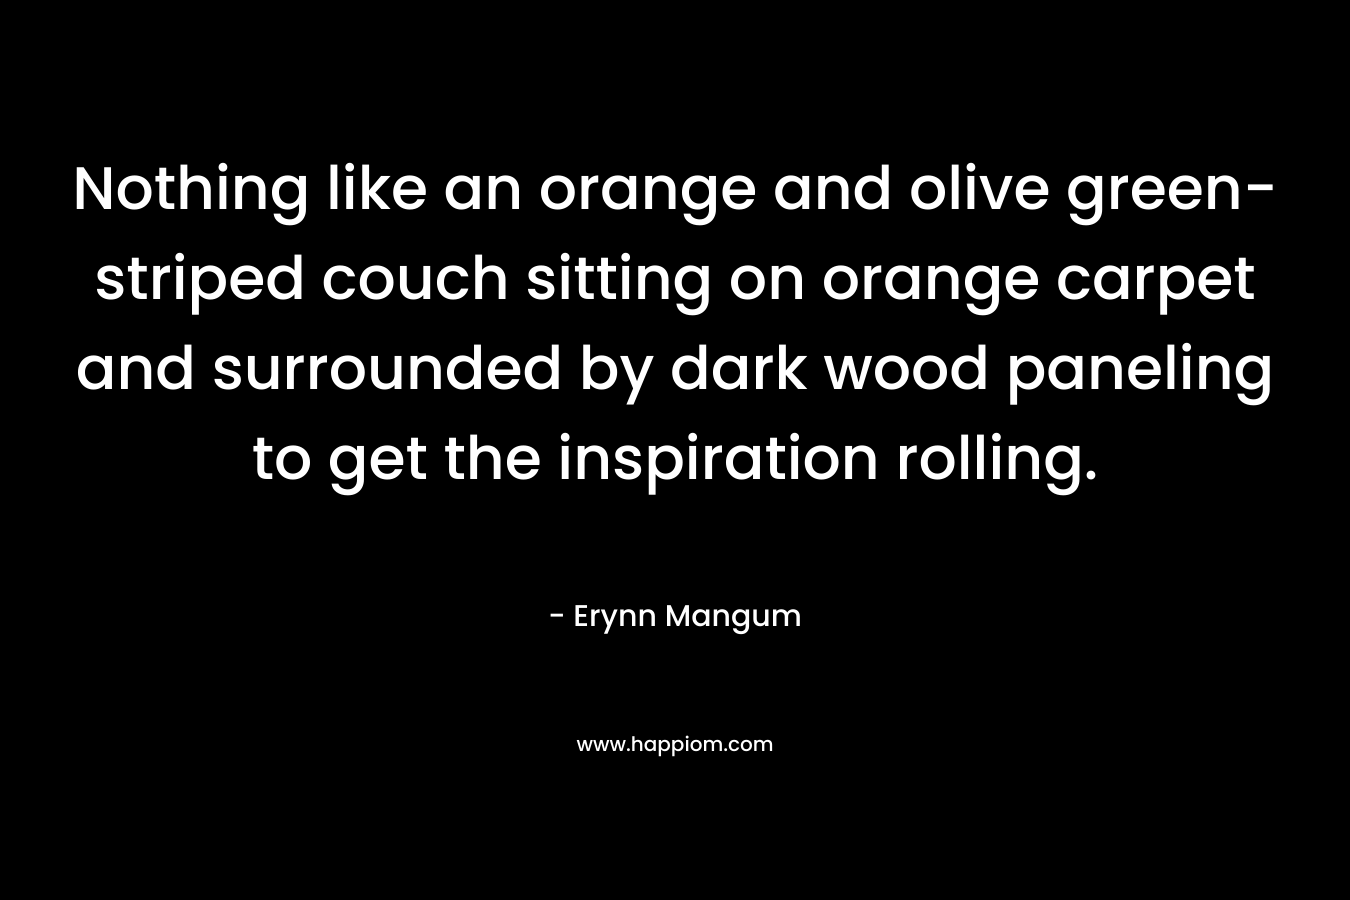 Nothing like an orange and olive green-striped couch sitting on orange carpet and surrounded by dark wood paneling to get the inspiration rolling. – Erynn Mangum